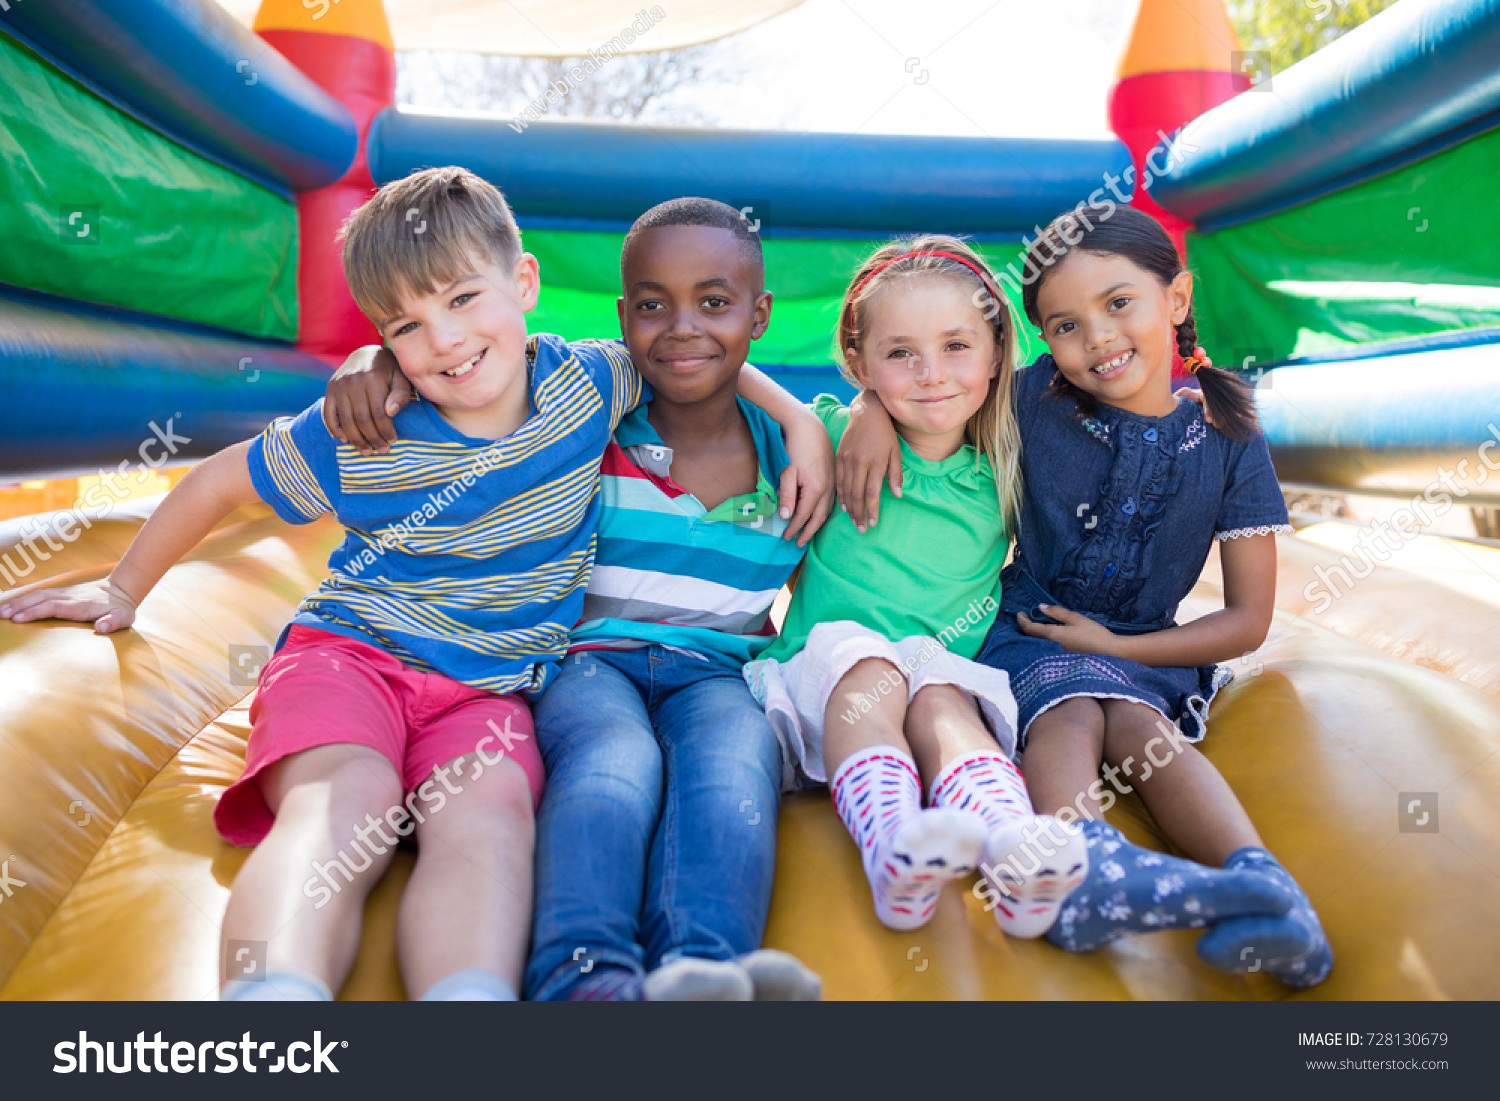 Portrait of friends with arms around sitting on bouncy castle at playground #728130679